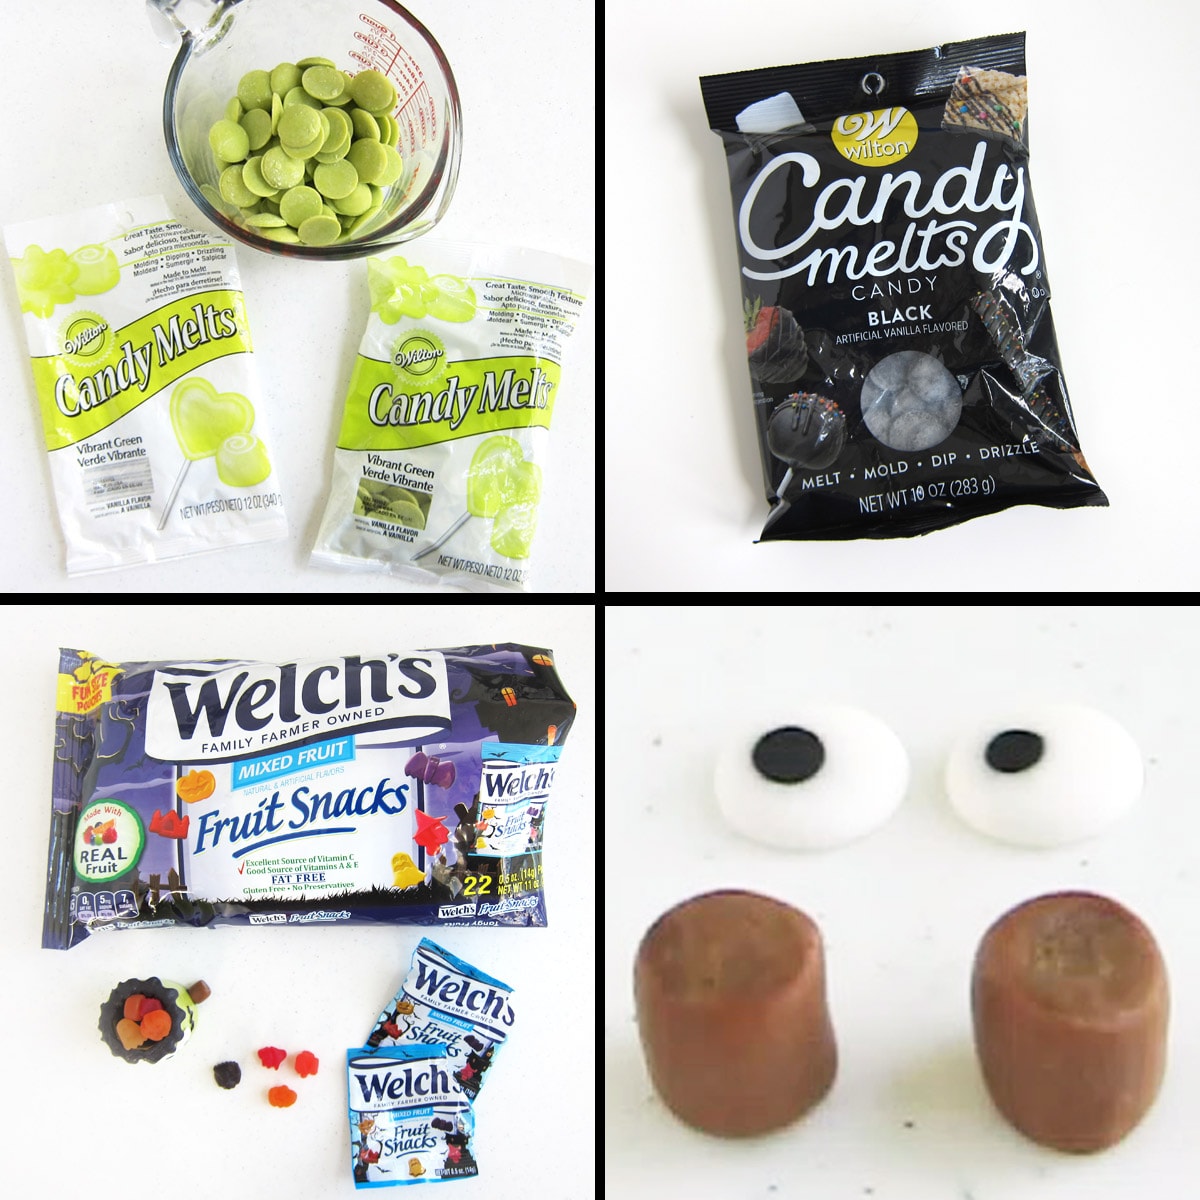 vibrant green candy melts, black candy melts, Welch's Fruit Snacks, candy eyes, and Tootsie Rolls.